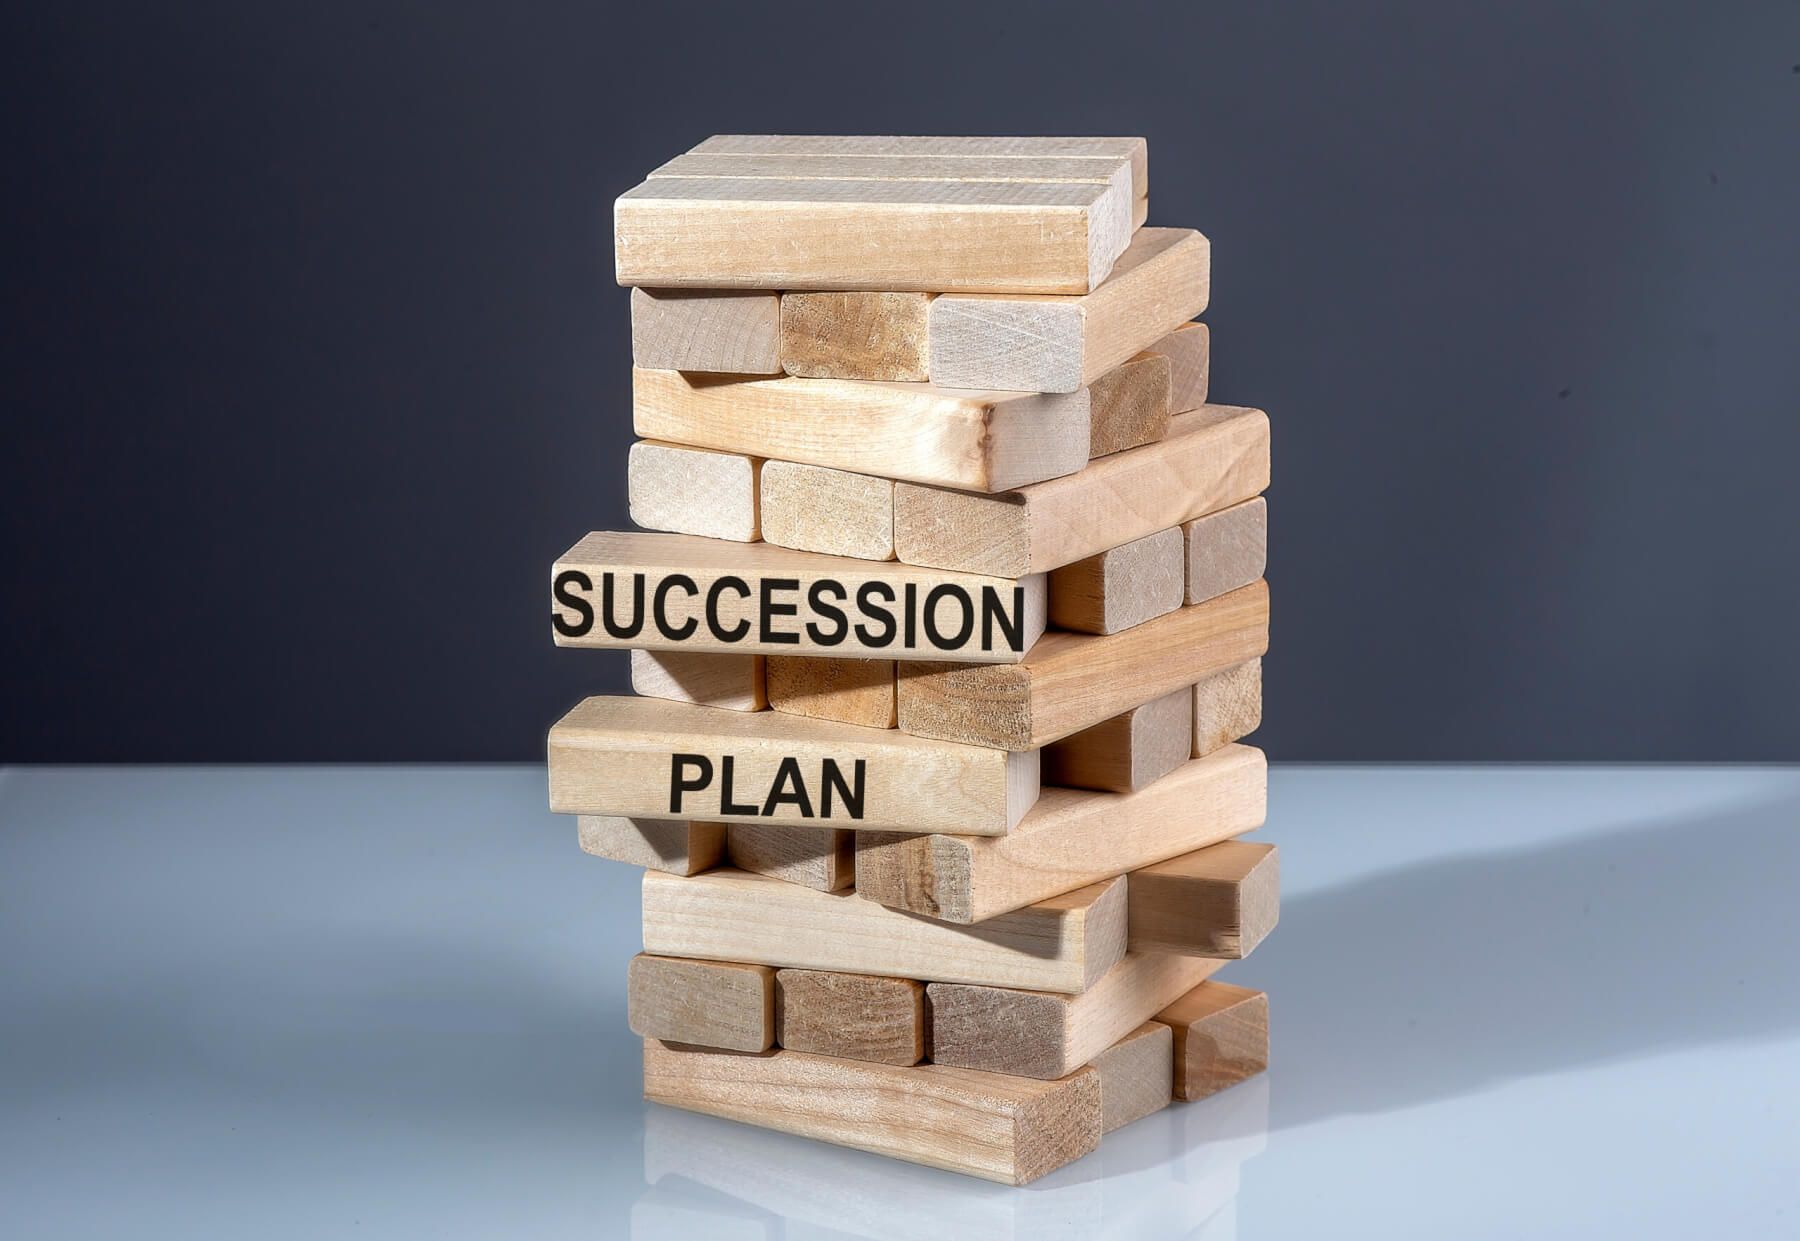 The text on the wooden blocks Succession Plan.